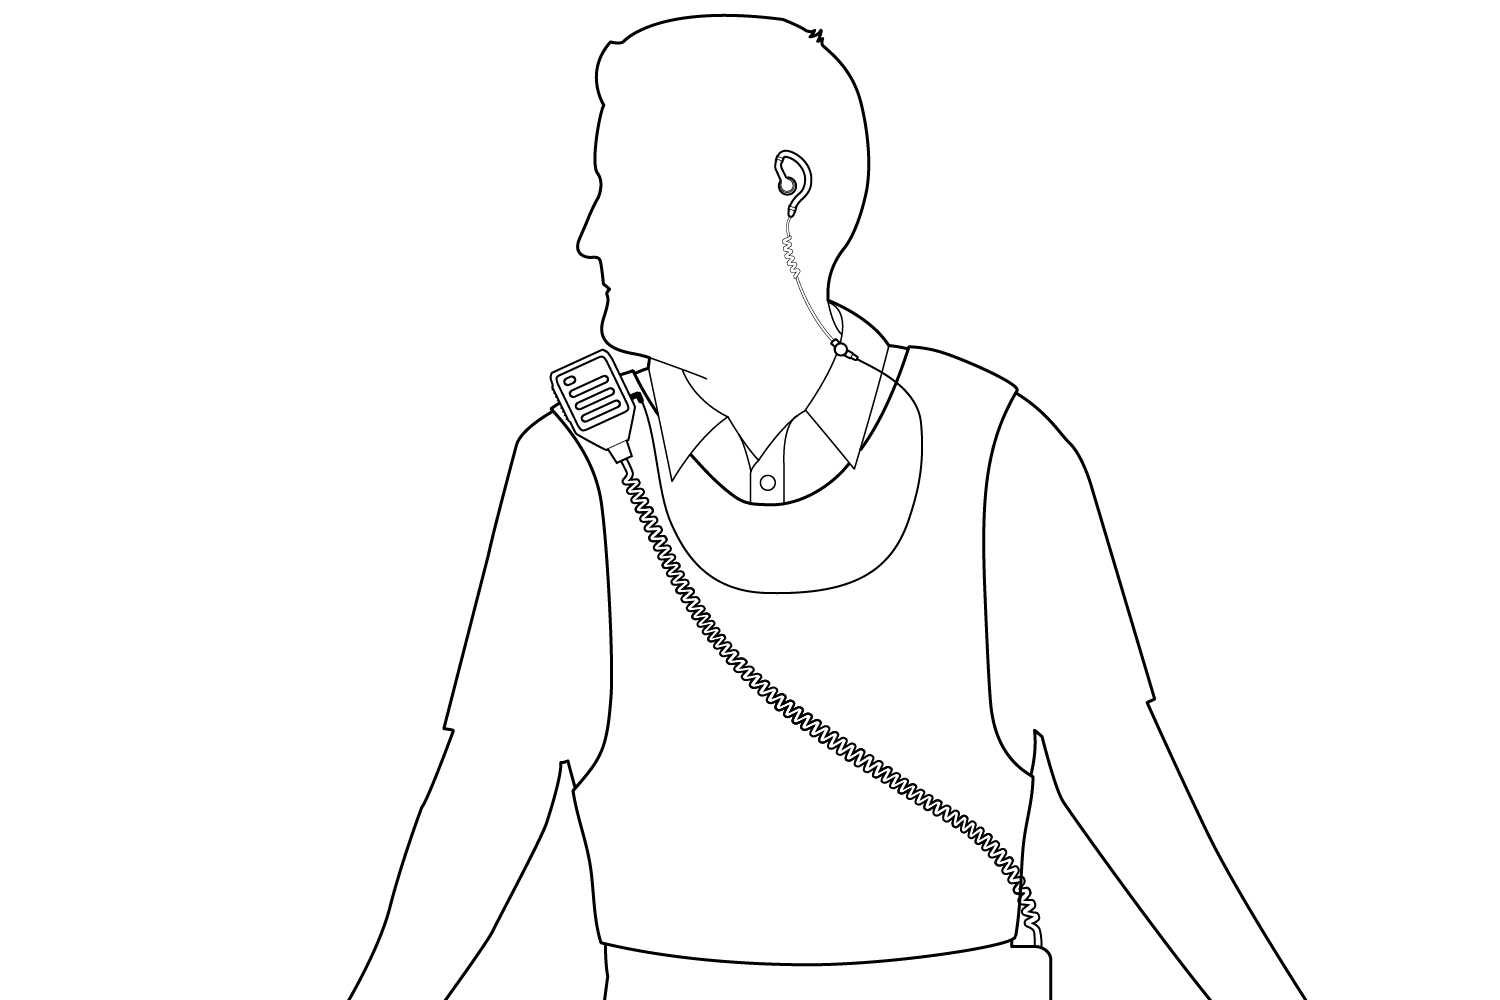 Wearing With RSM – Long Cable Diagram